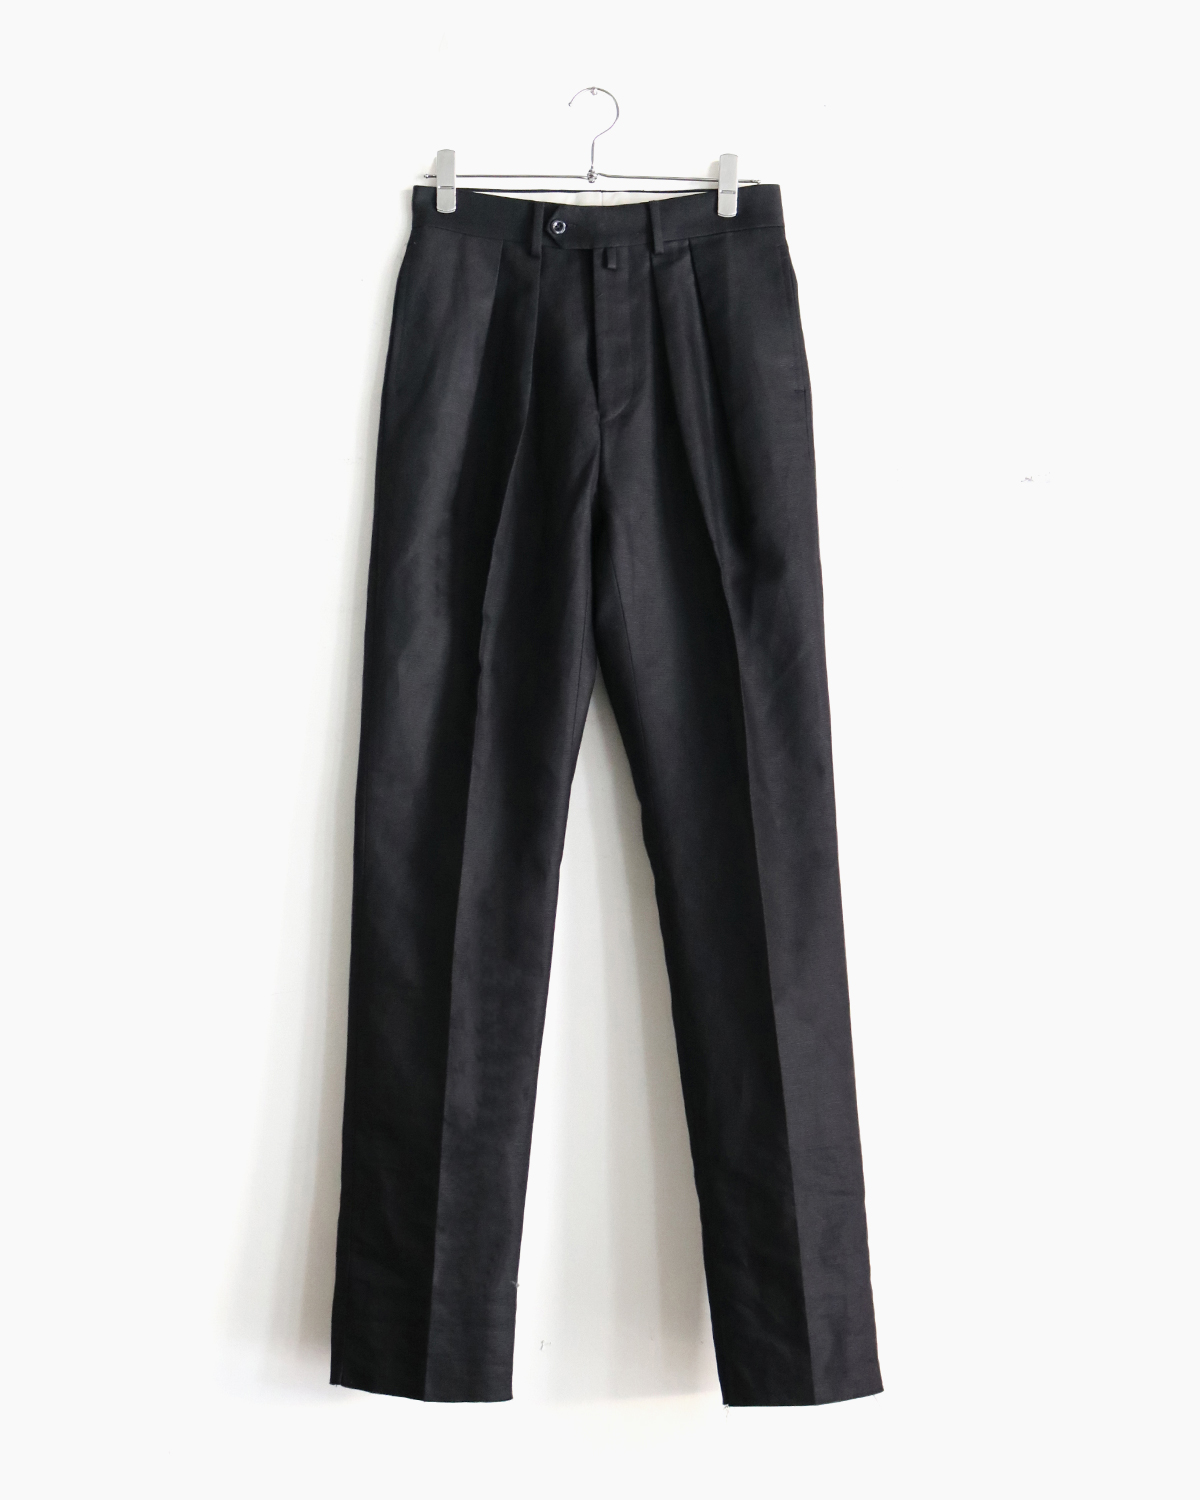 NEAT｜C/L OXFORD｜STANDARD - Black｜PRODUCT｜Continuer Inc